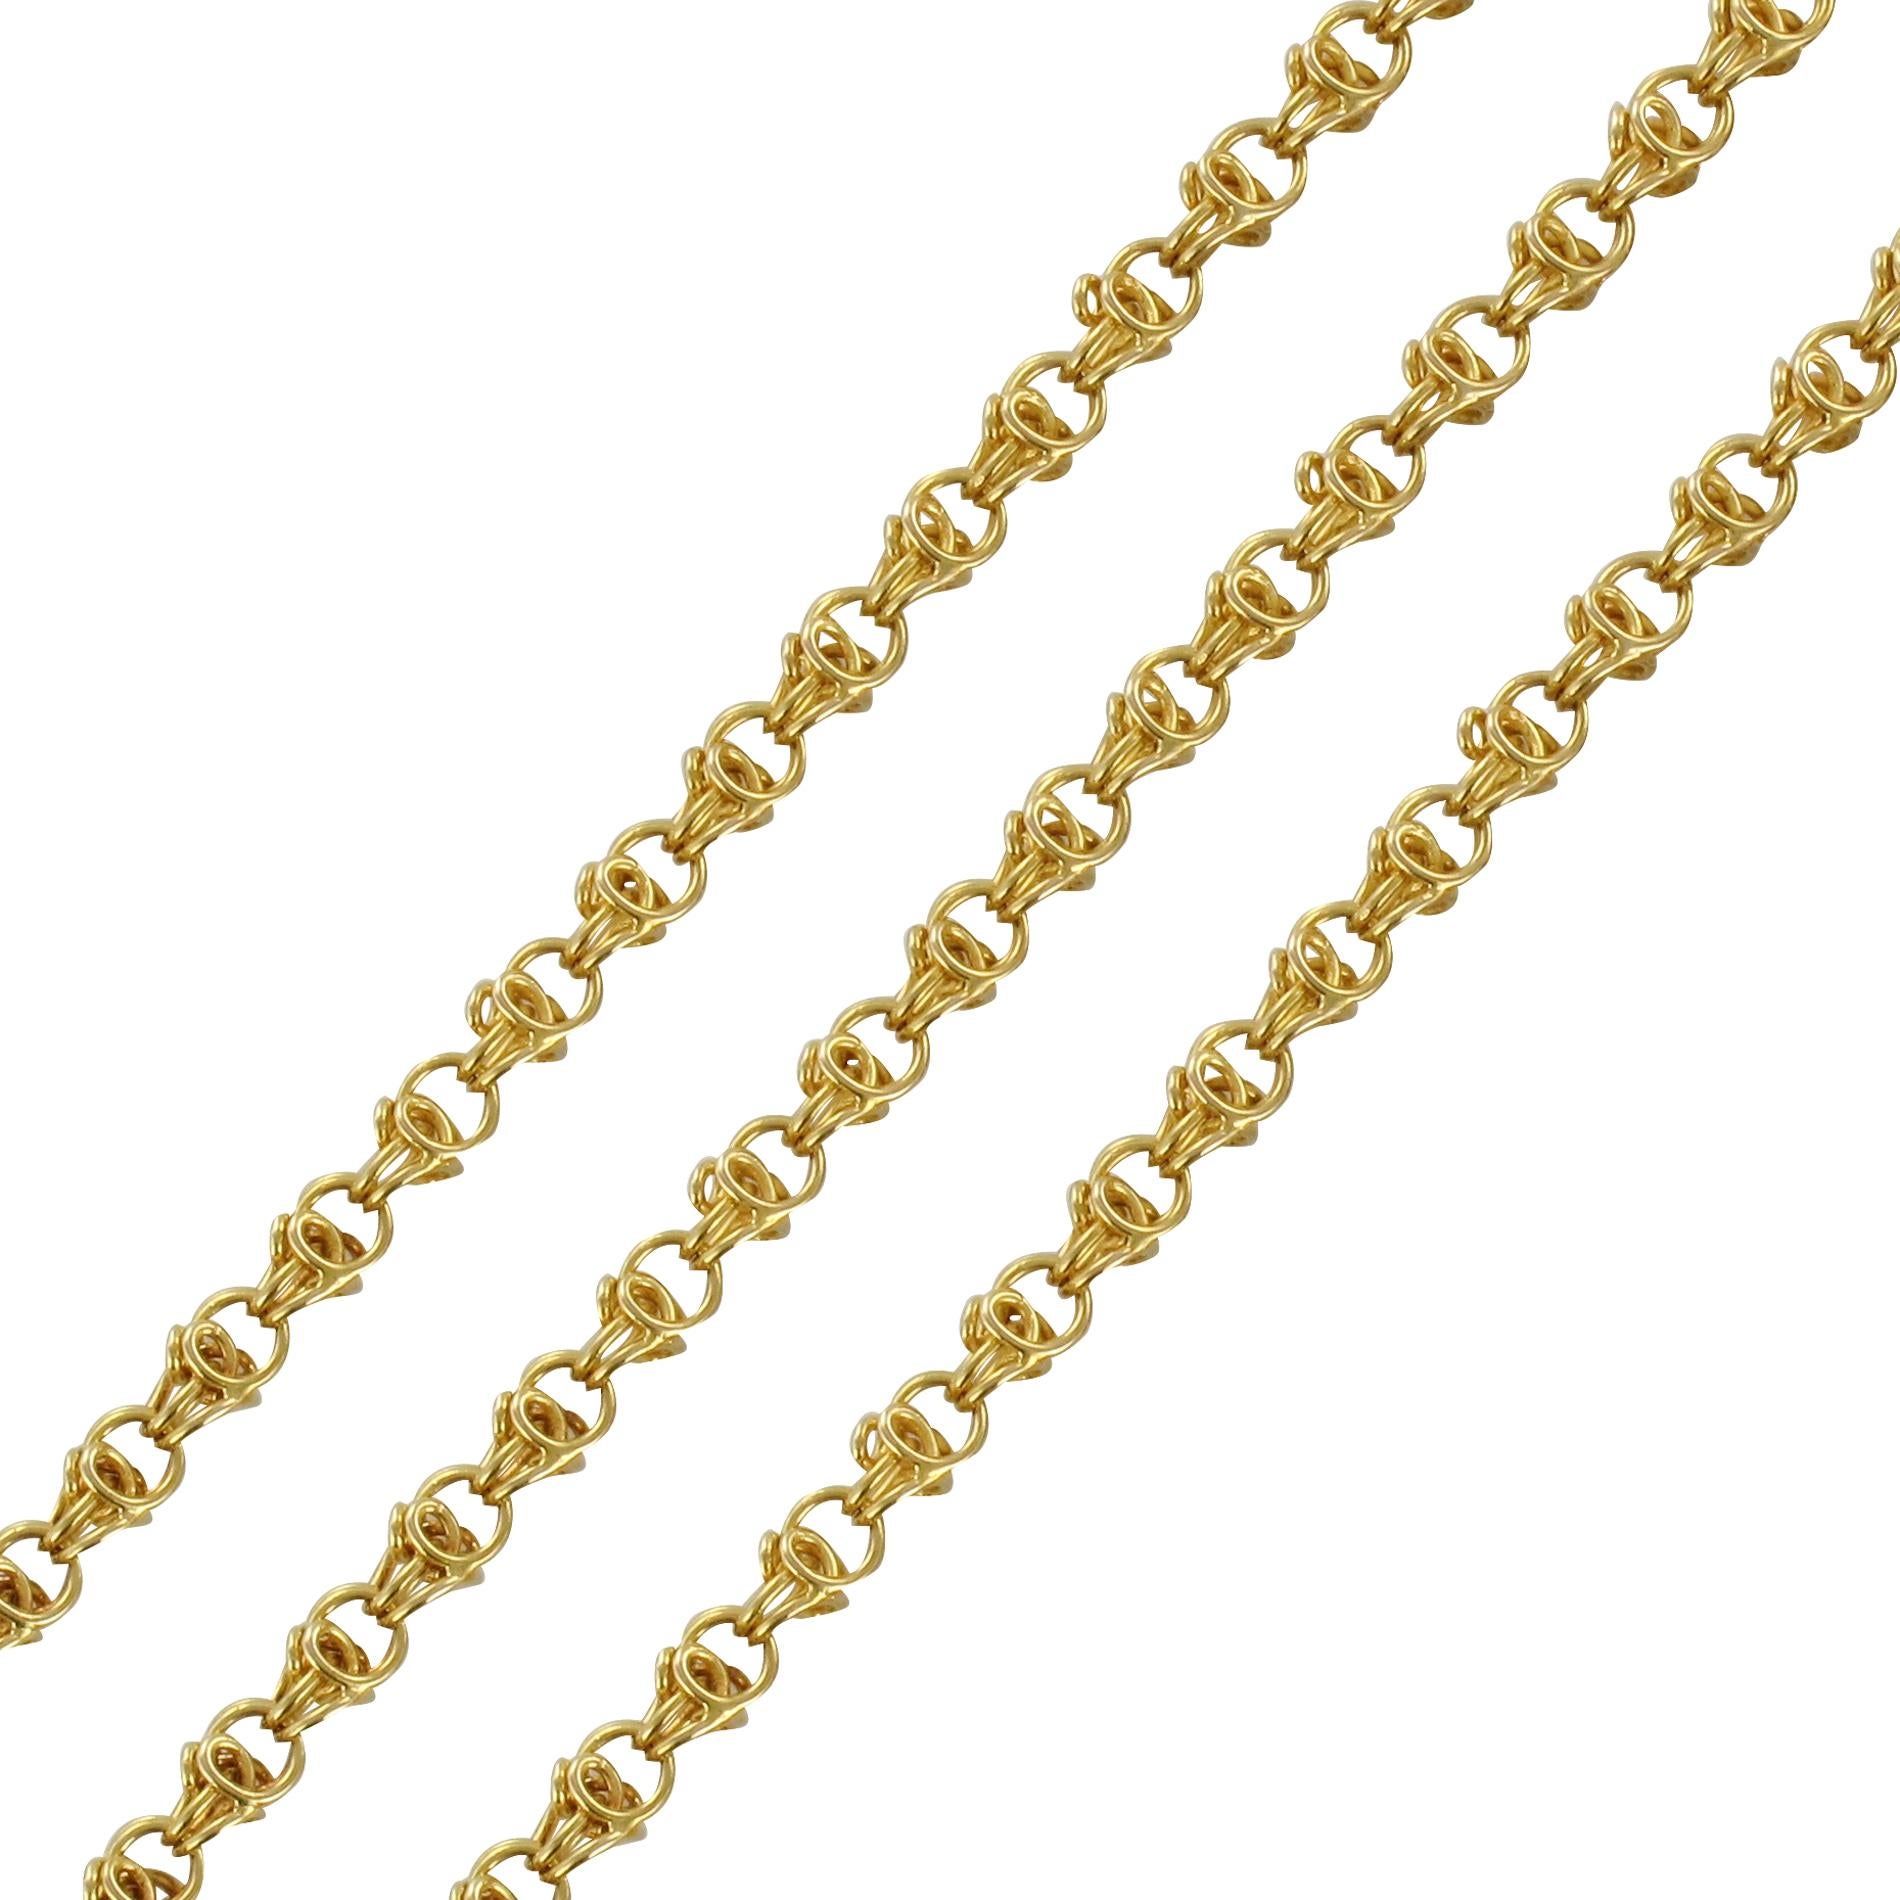 Napoleon 3 French 18 Karat Yellow Gold Long Chain Necklace